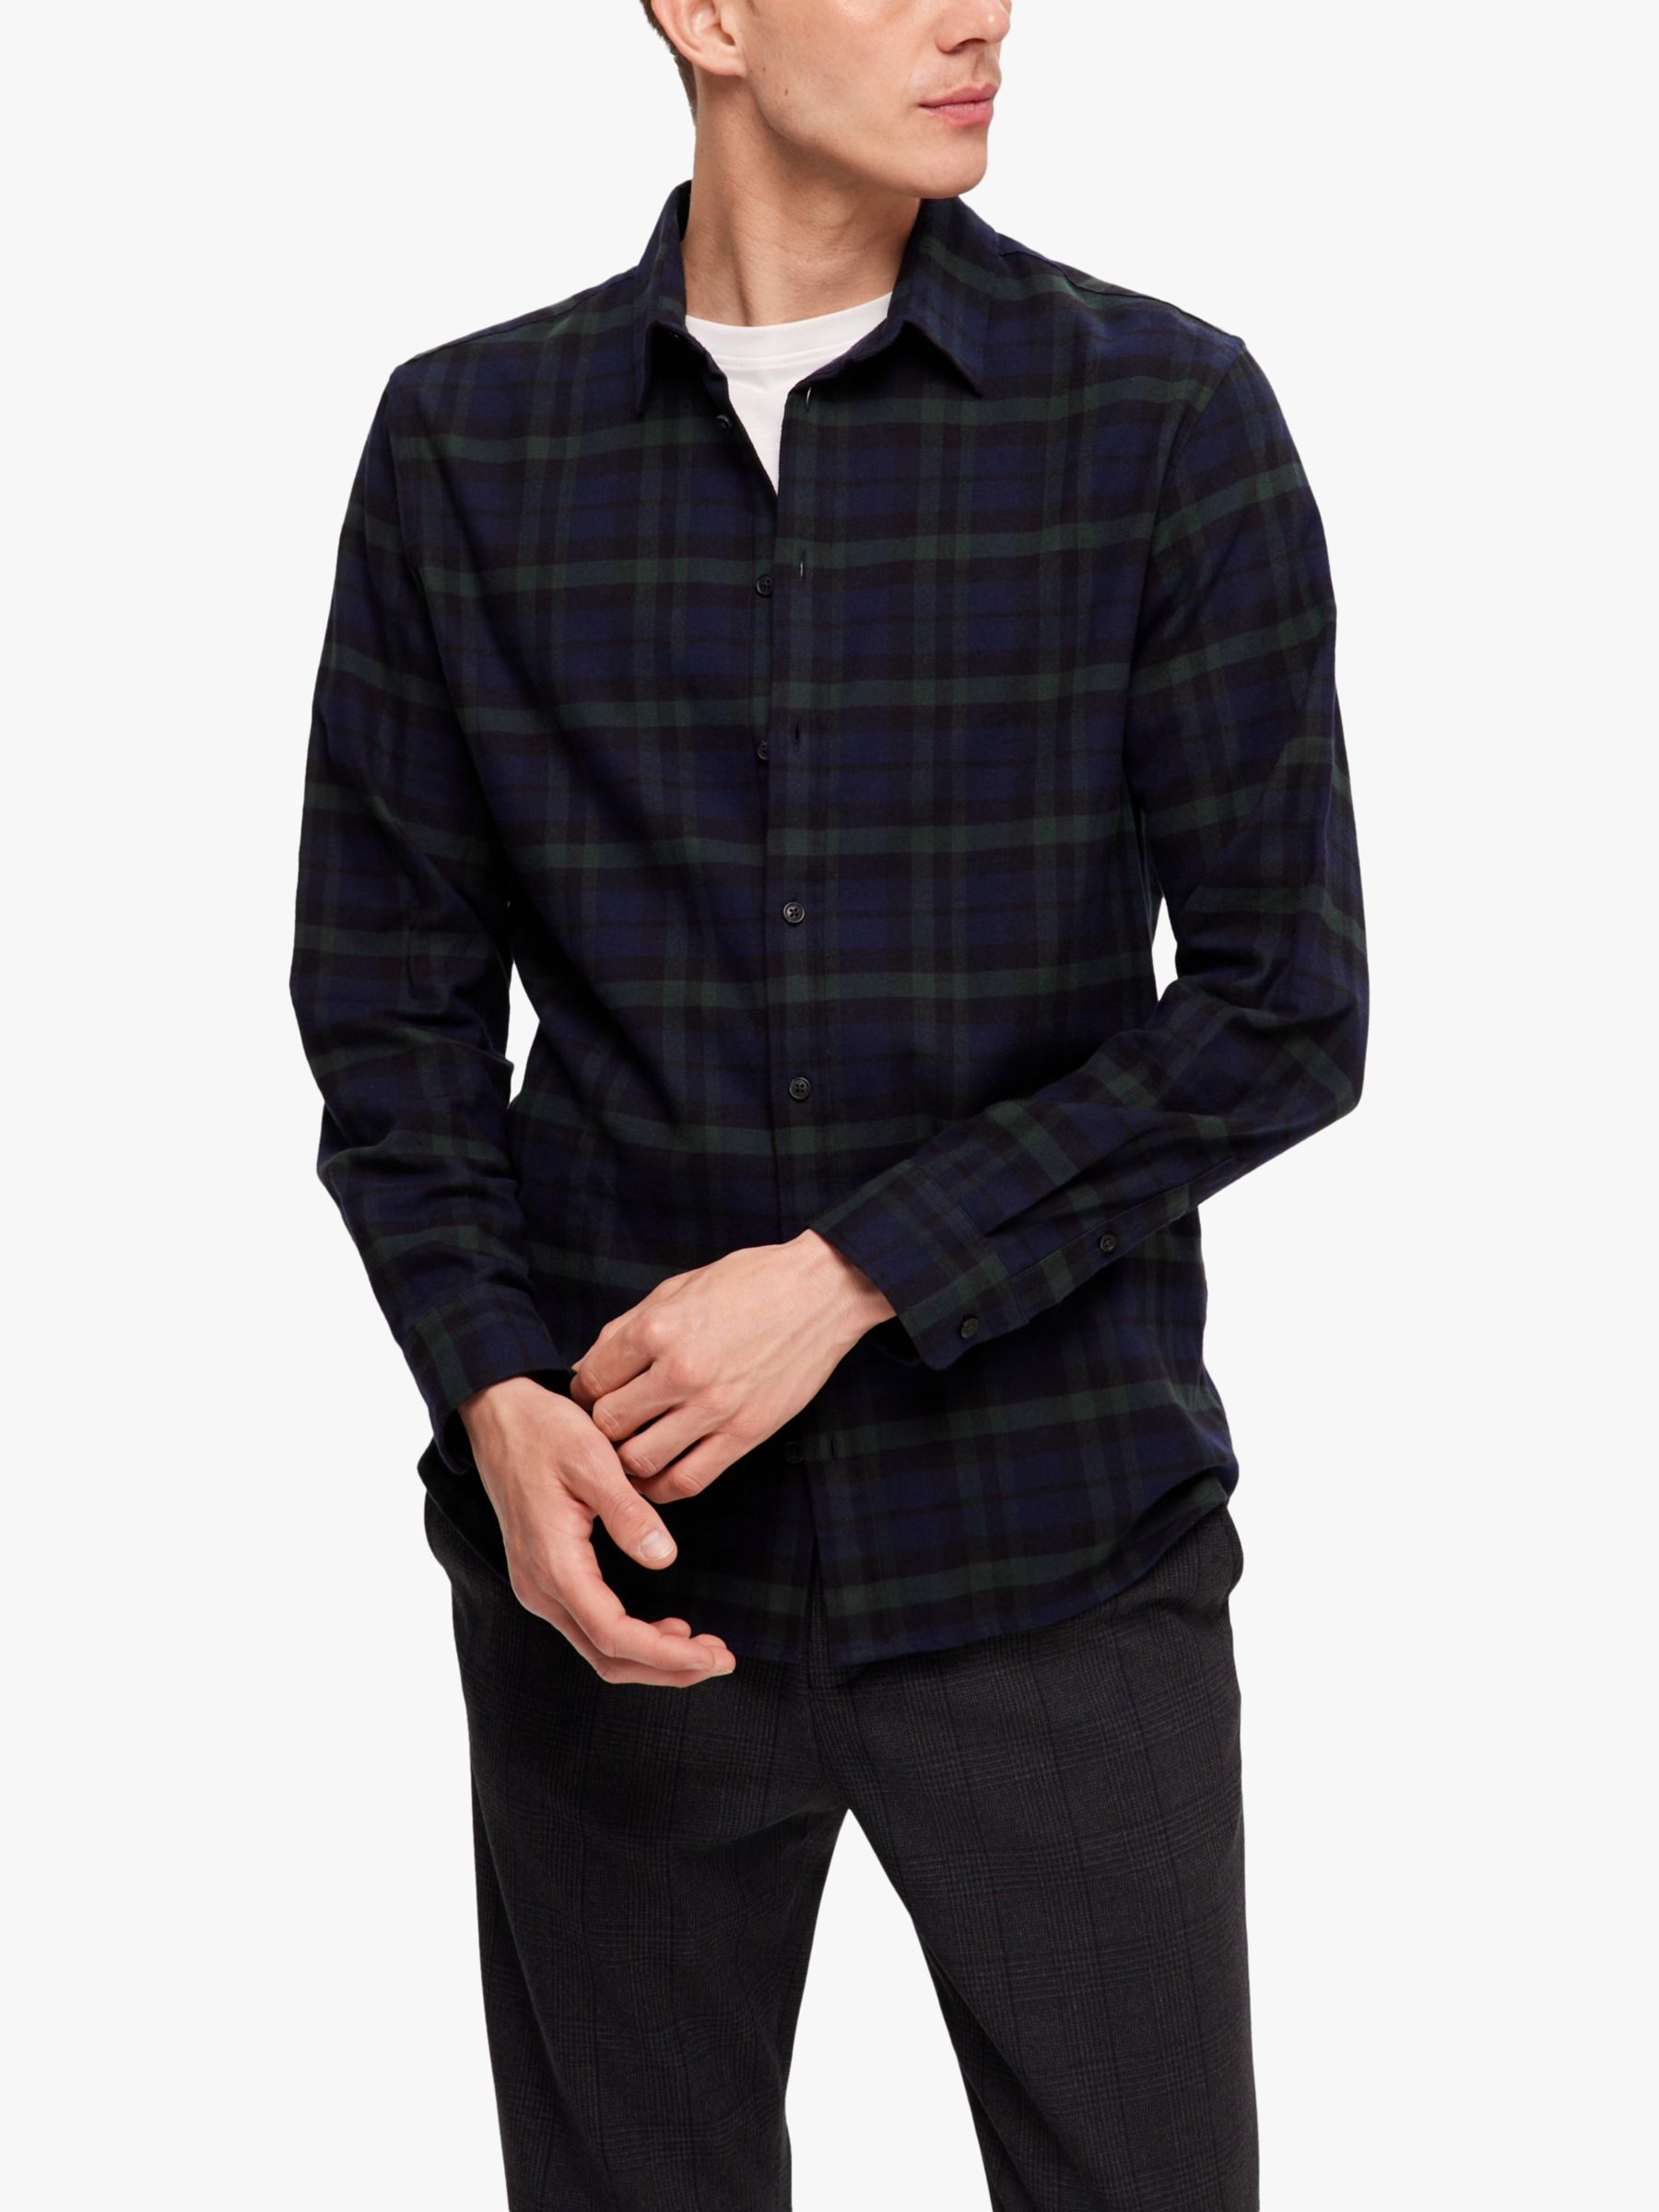 SELECTED HOMME Flannel Shirt, Blue/Multi, M